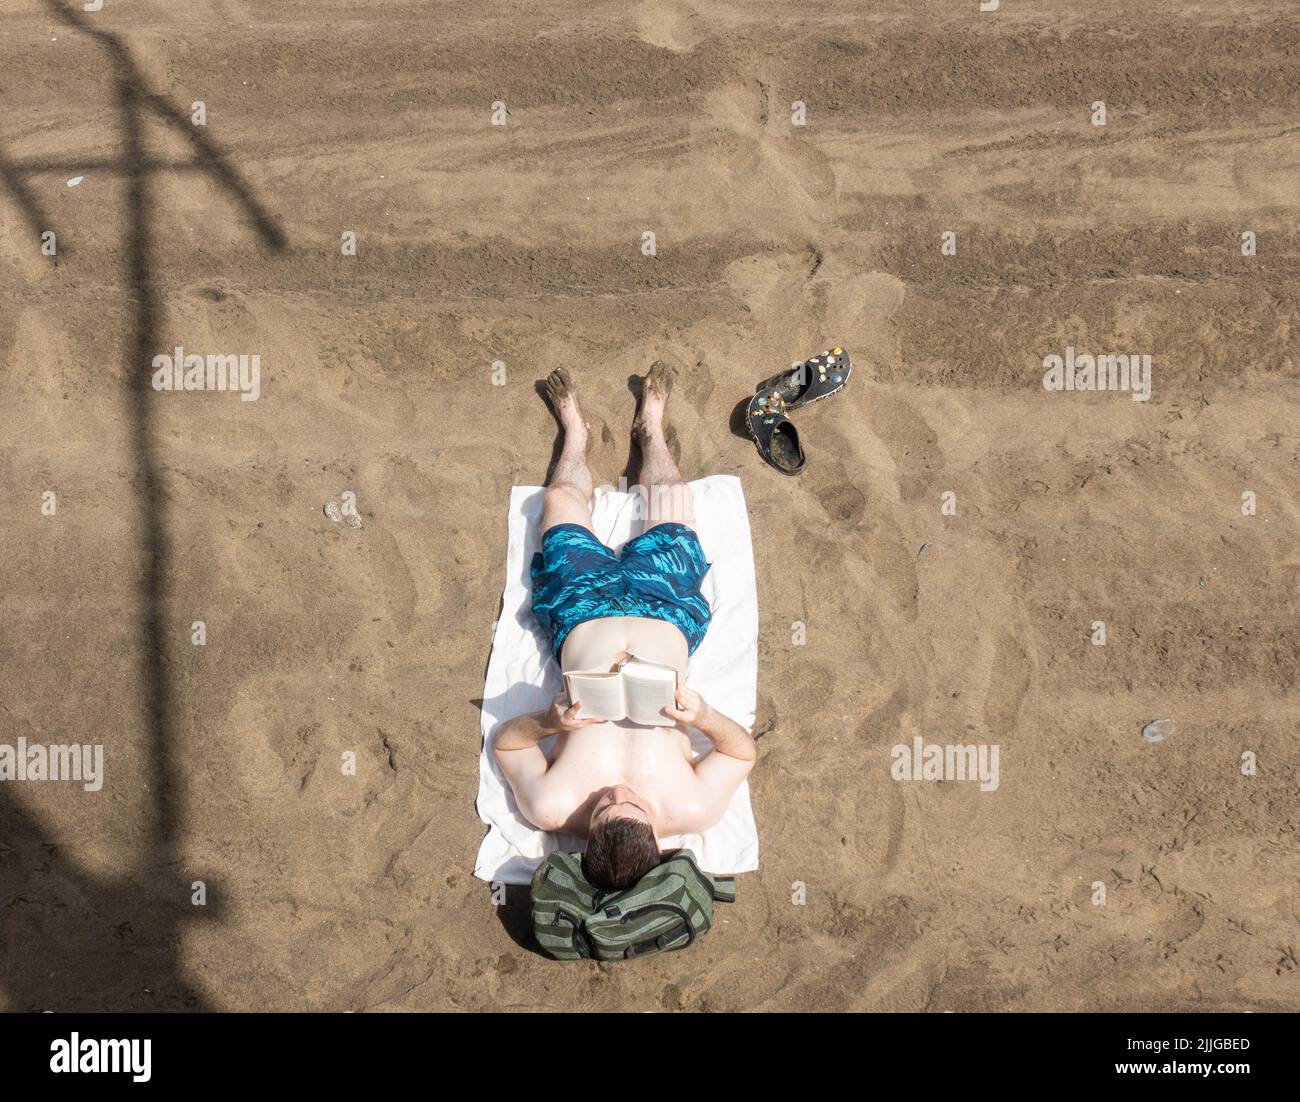 Las Palmas, Gran Canaria, Canary Islands, Spain. 26th July, 2022. Tourists, many from the UK, swelter on the city beach in Las Palmas during a heatwave on Gran Canaria. The south west of the island registered 45 degrees Celicius on Monday. Credit: Alan Dawson/ Alamy Live News.  Stock Photo